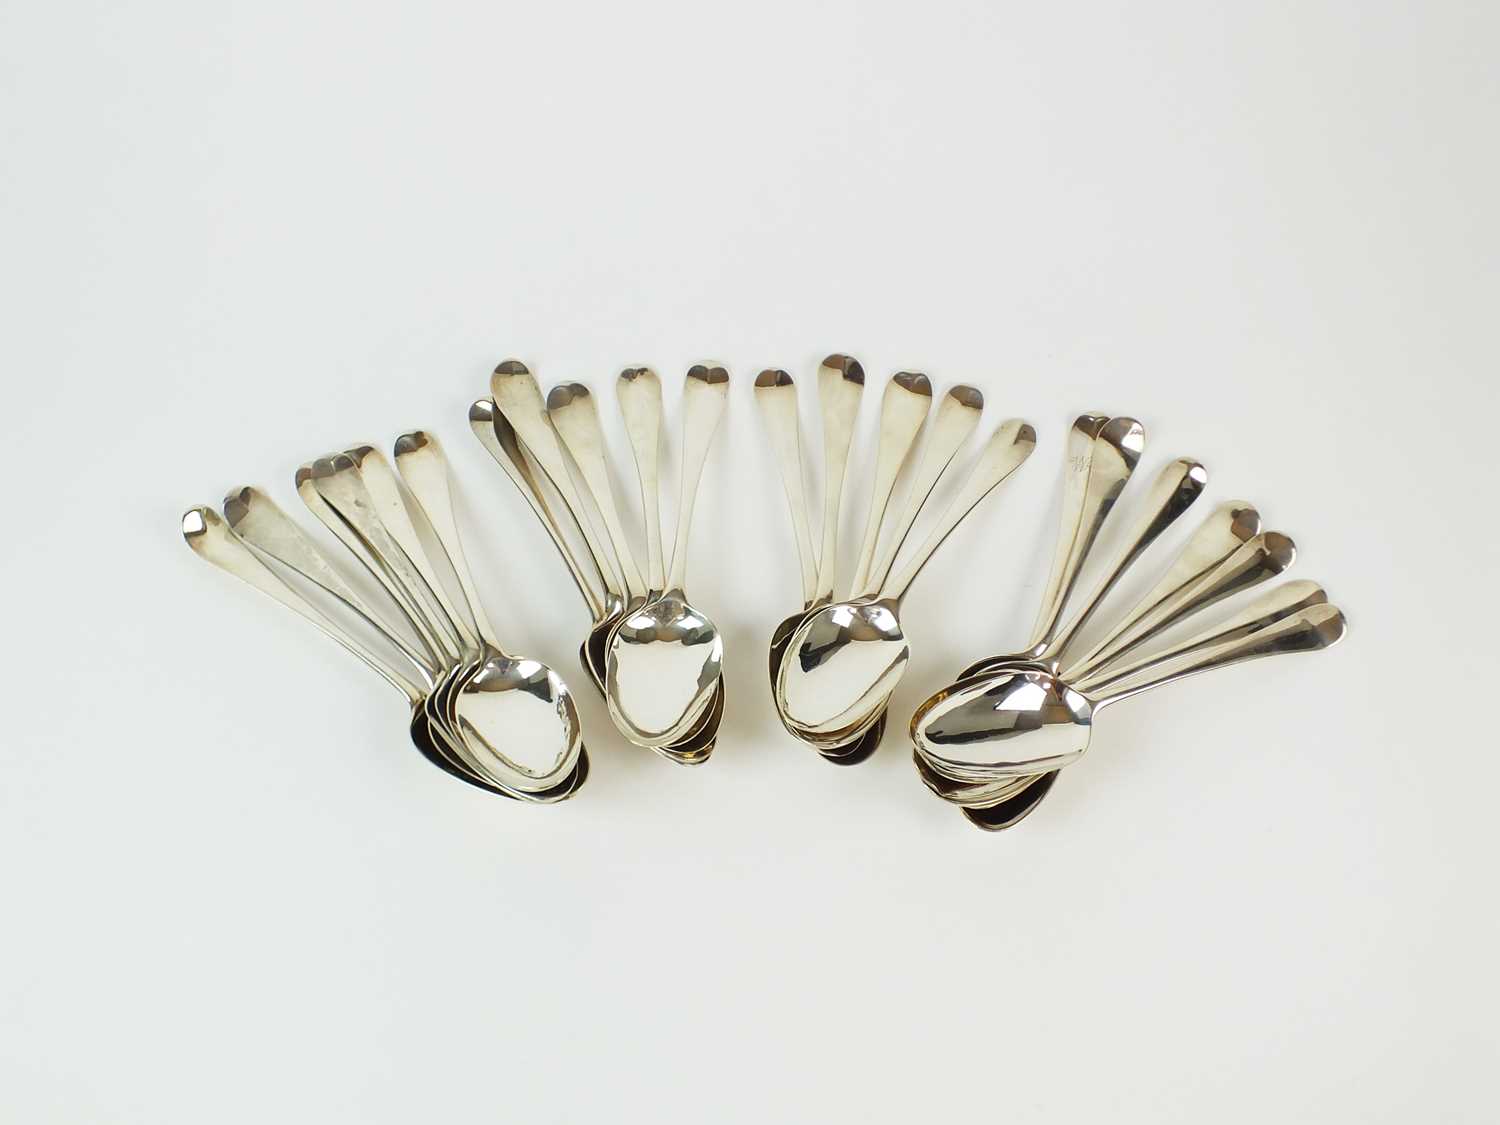 A collection of mid-18th century Hanoverian pattern silver tablespoons